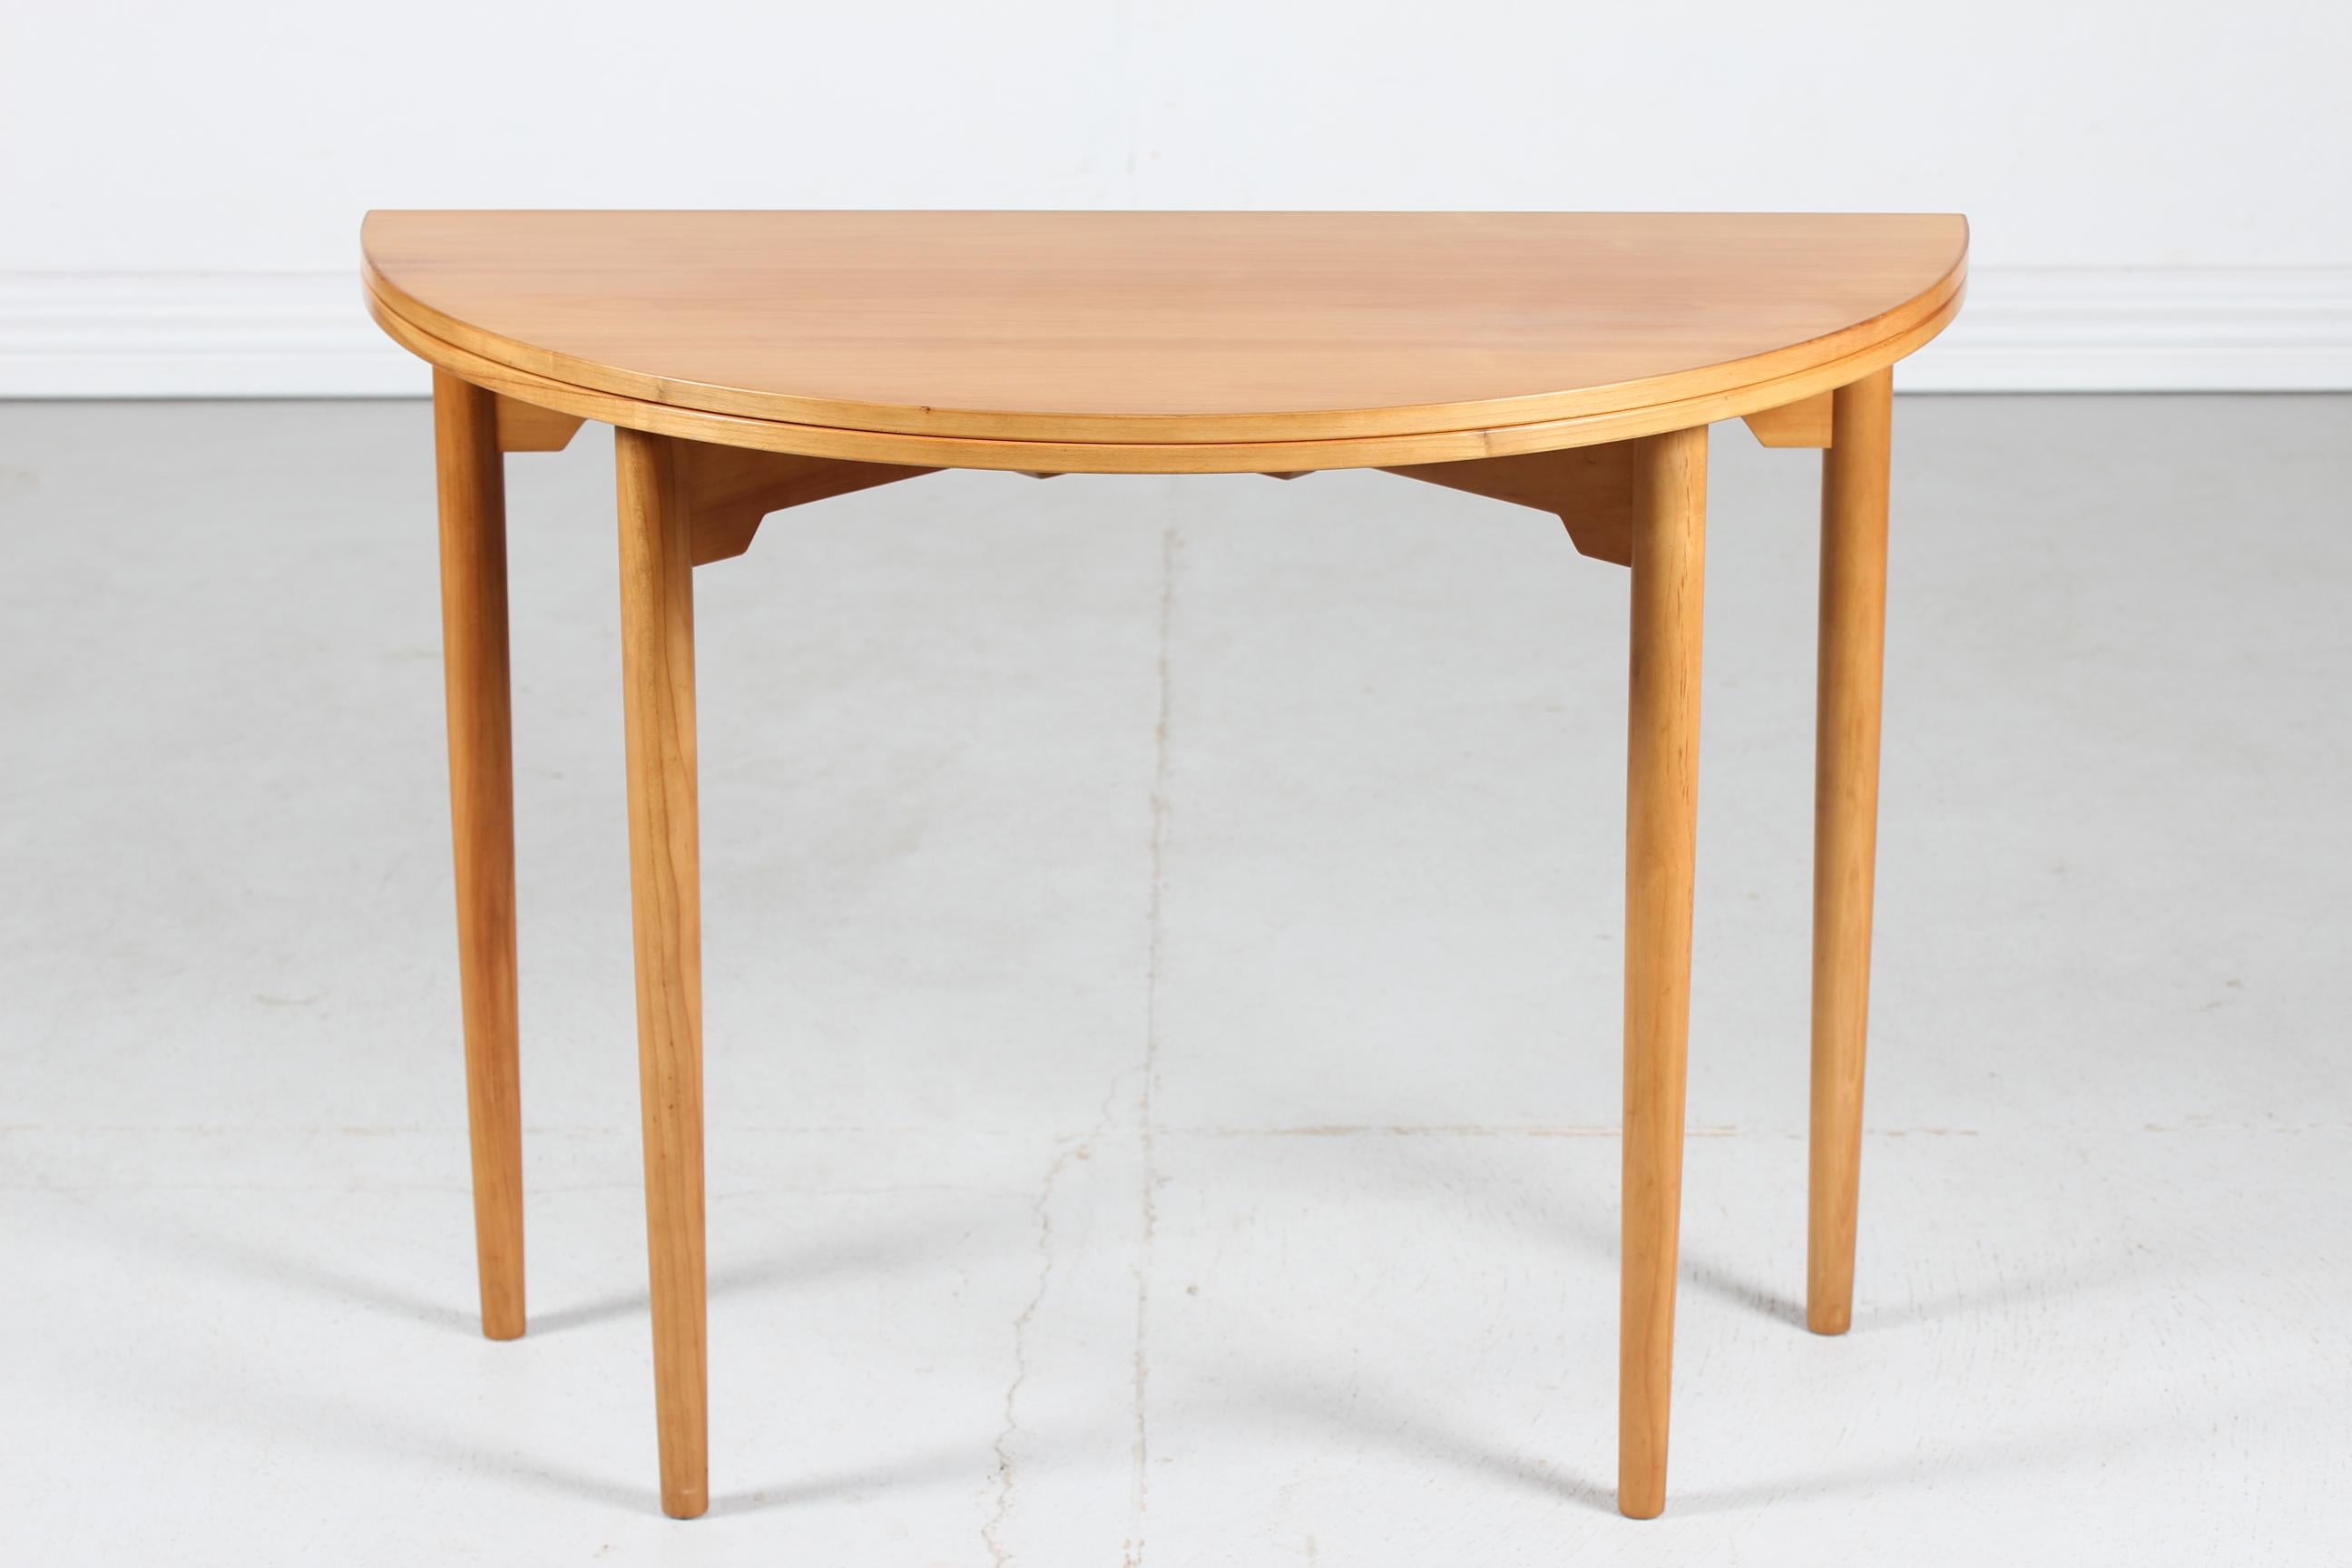 Round table/card table model 2081 by the Danish architect Hans J. Wegner (1914-2007) and manufactured by Fritz Hansen A/S in September 1968, Denmark.
The table is made of cherry wood with lacquer and has brass fittings.

Measures: 
Height 70,5